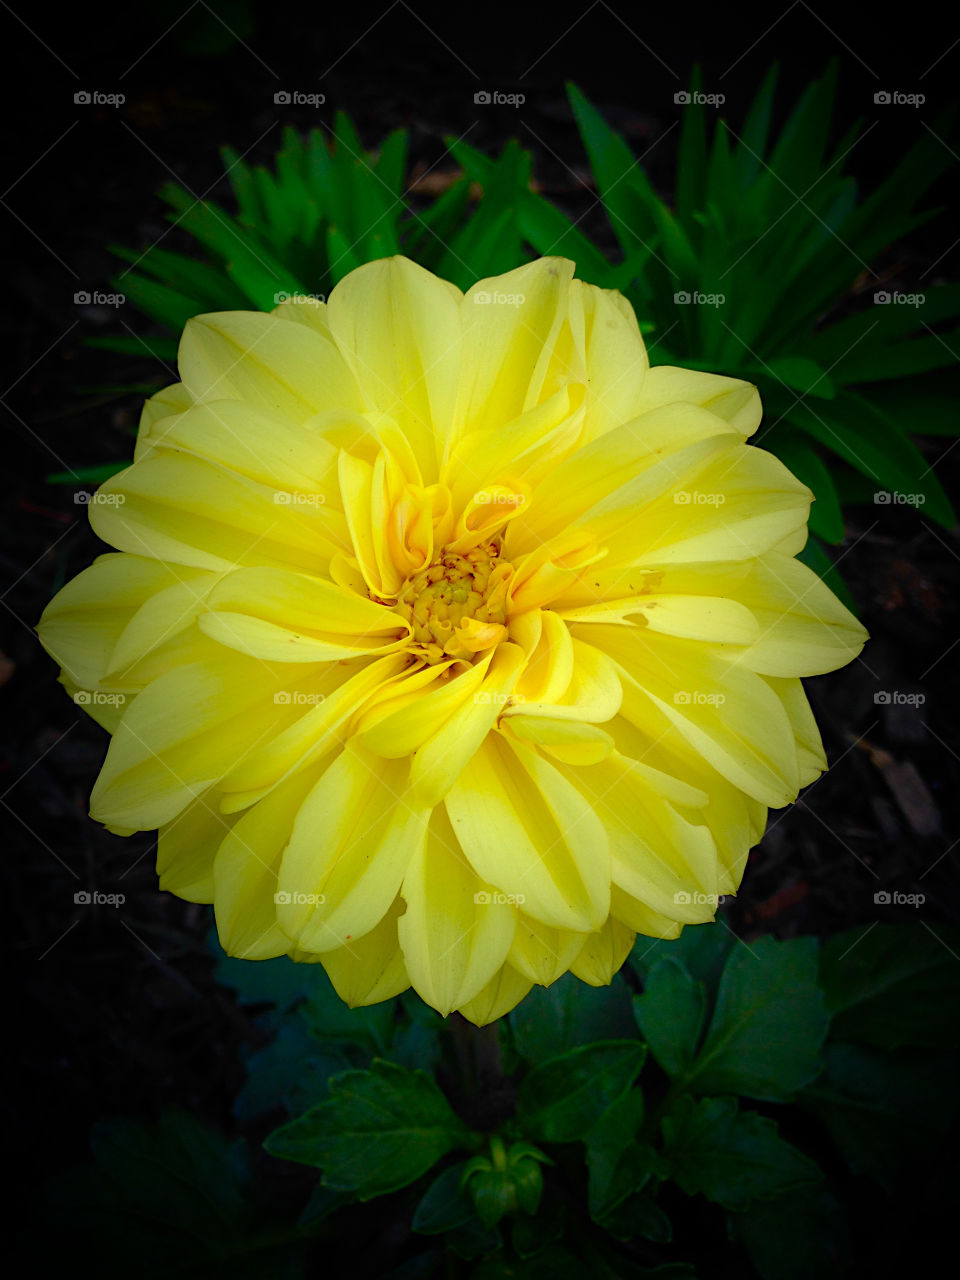 Overhead view of a yellow flower